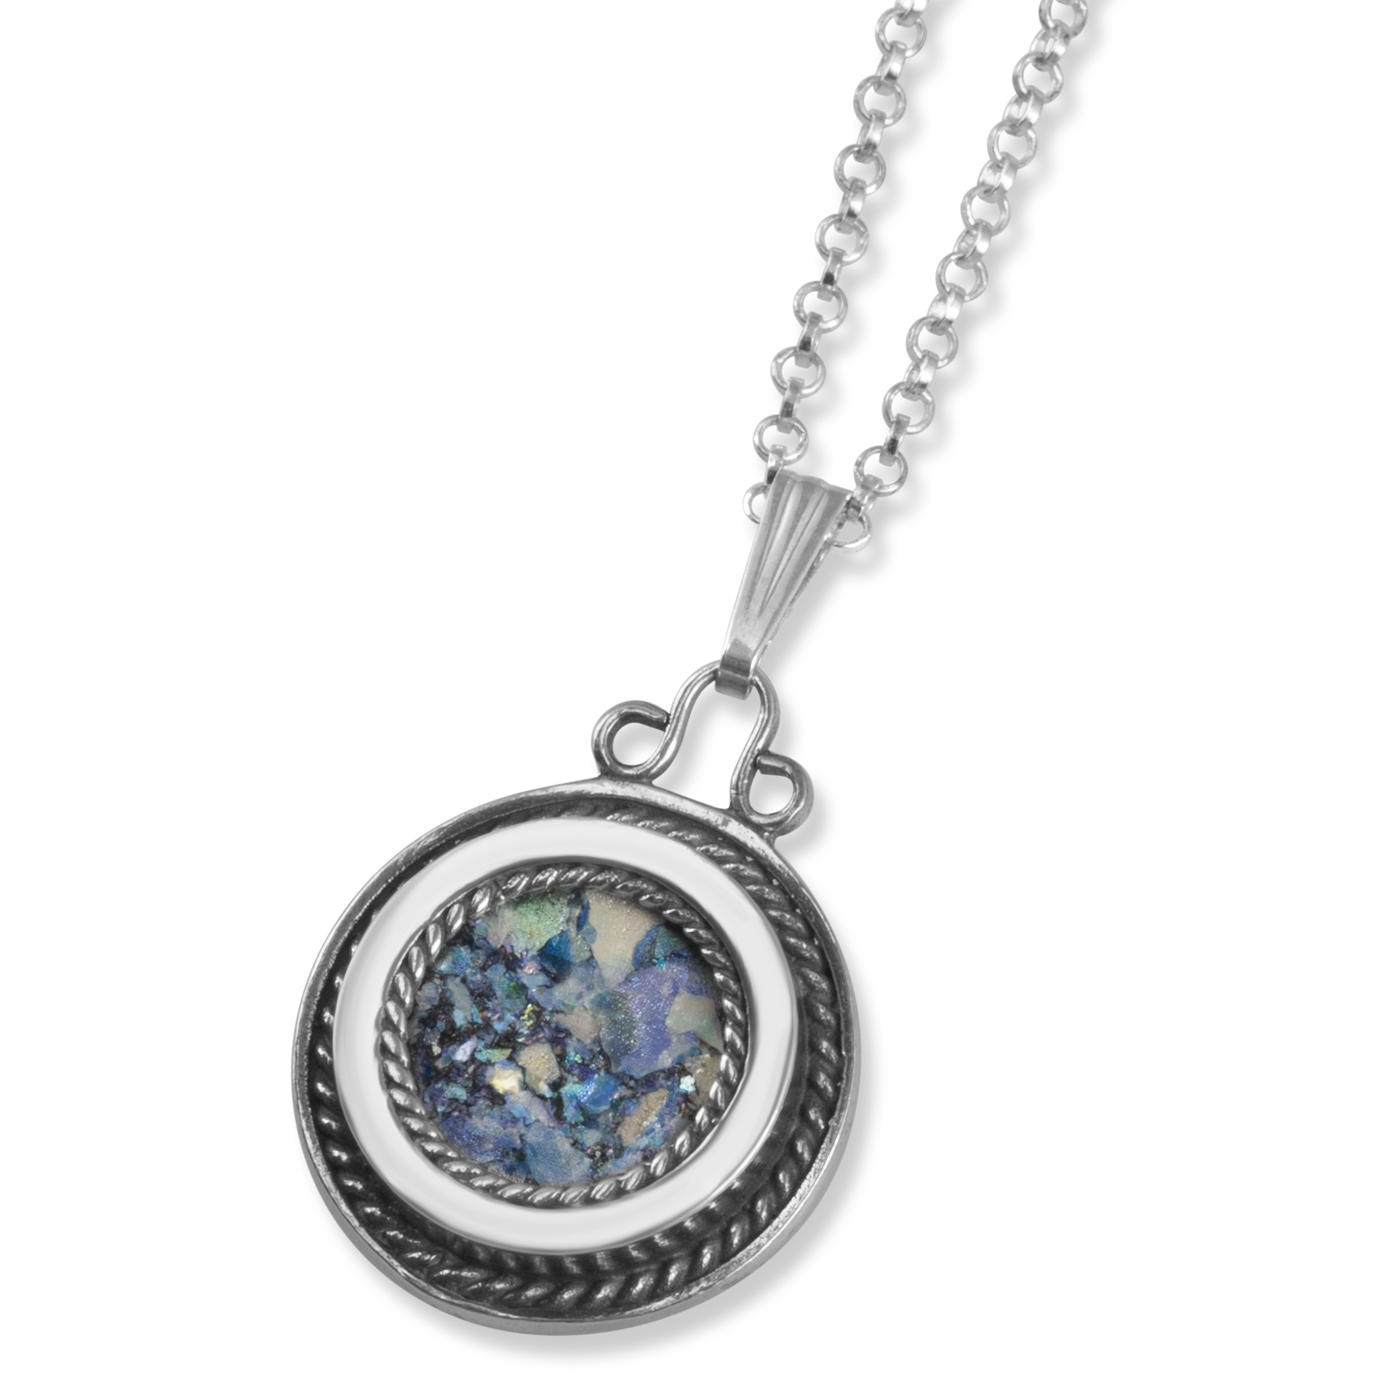 925 Sterling Silver Round Roman Glass Necklace with Filigree Border - 1